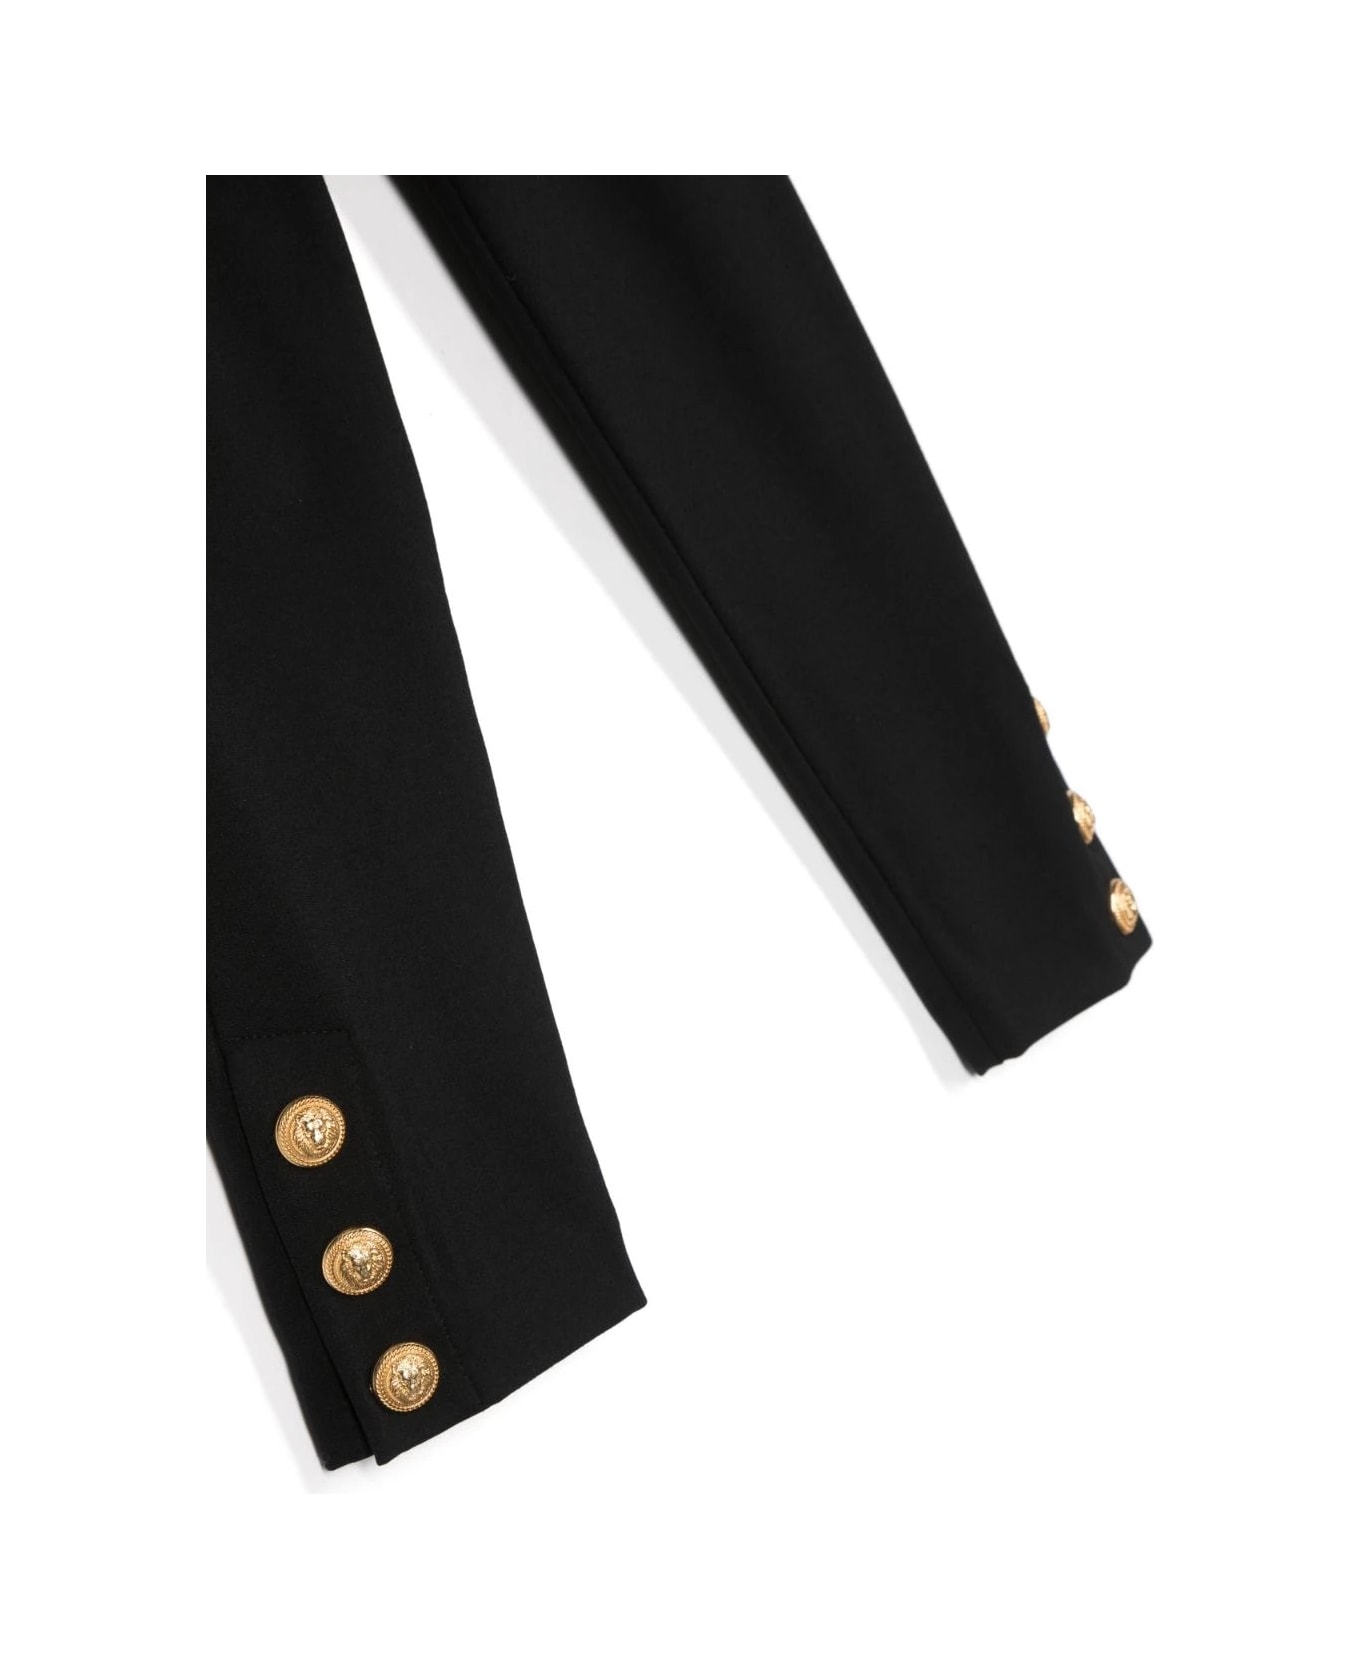 Balmain Black High Waist Pants With Gold Embossed Buttons - black